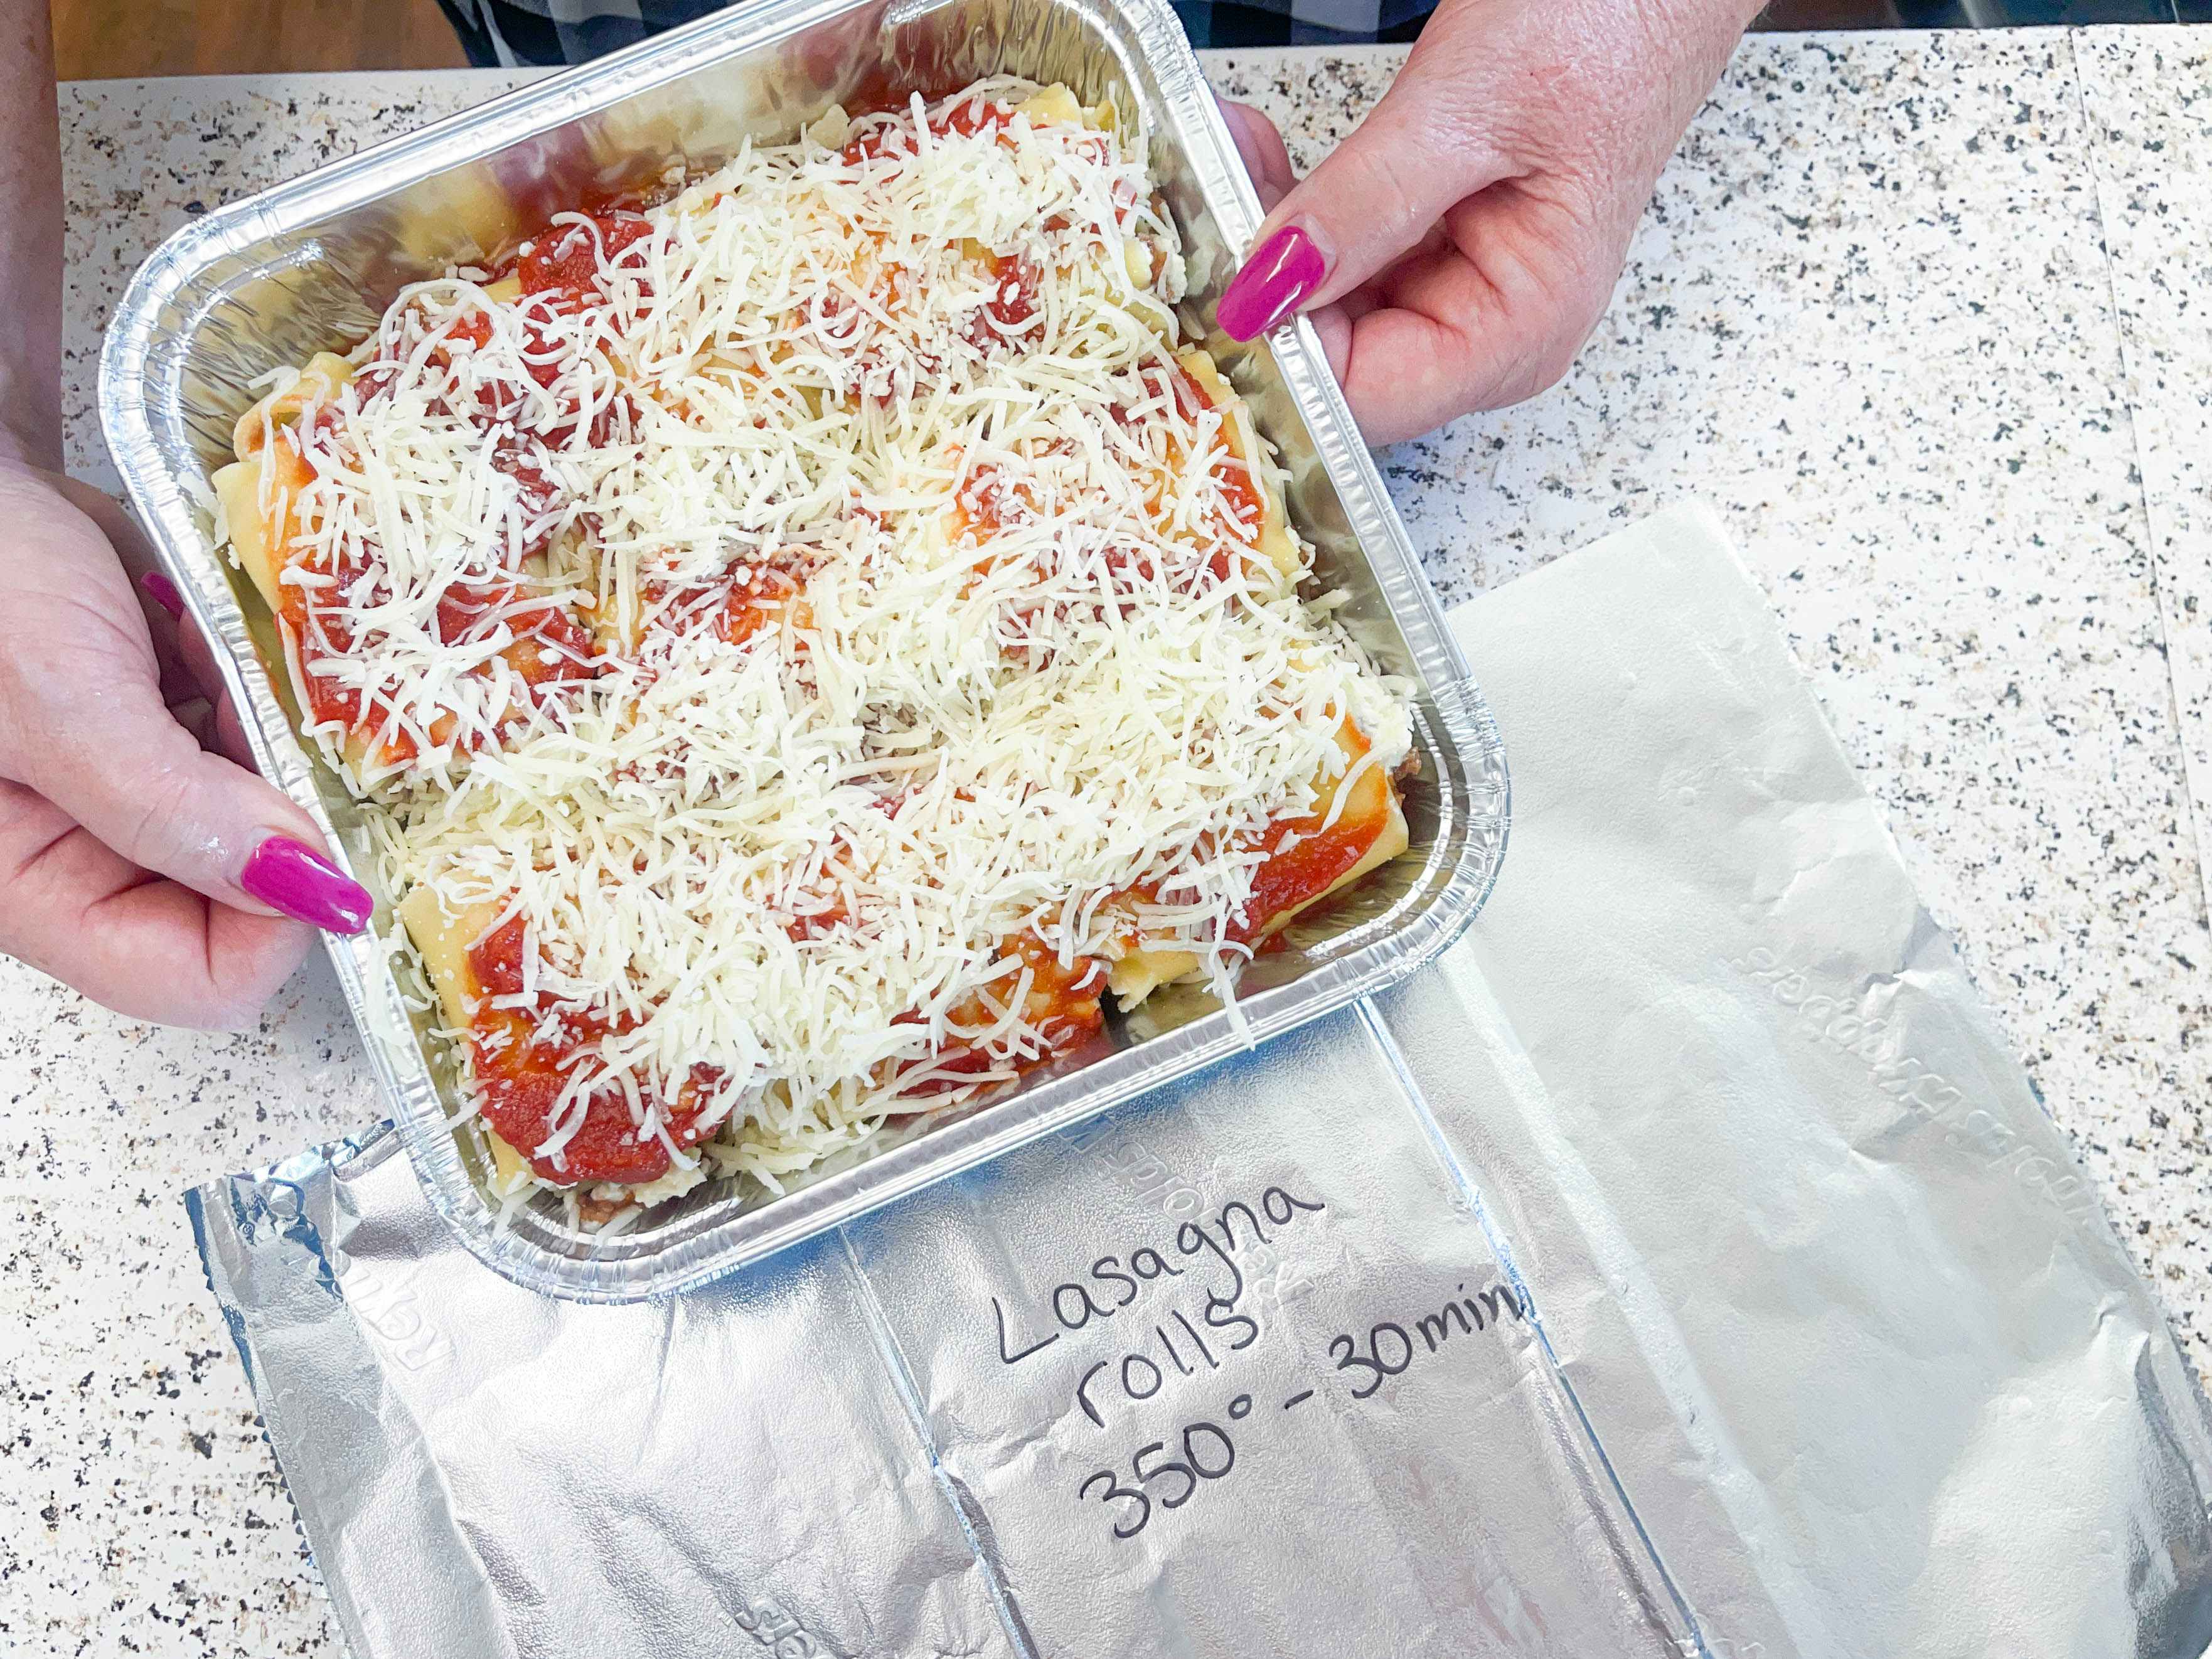 a person holding a lasagna rollup freezer meal